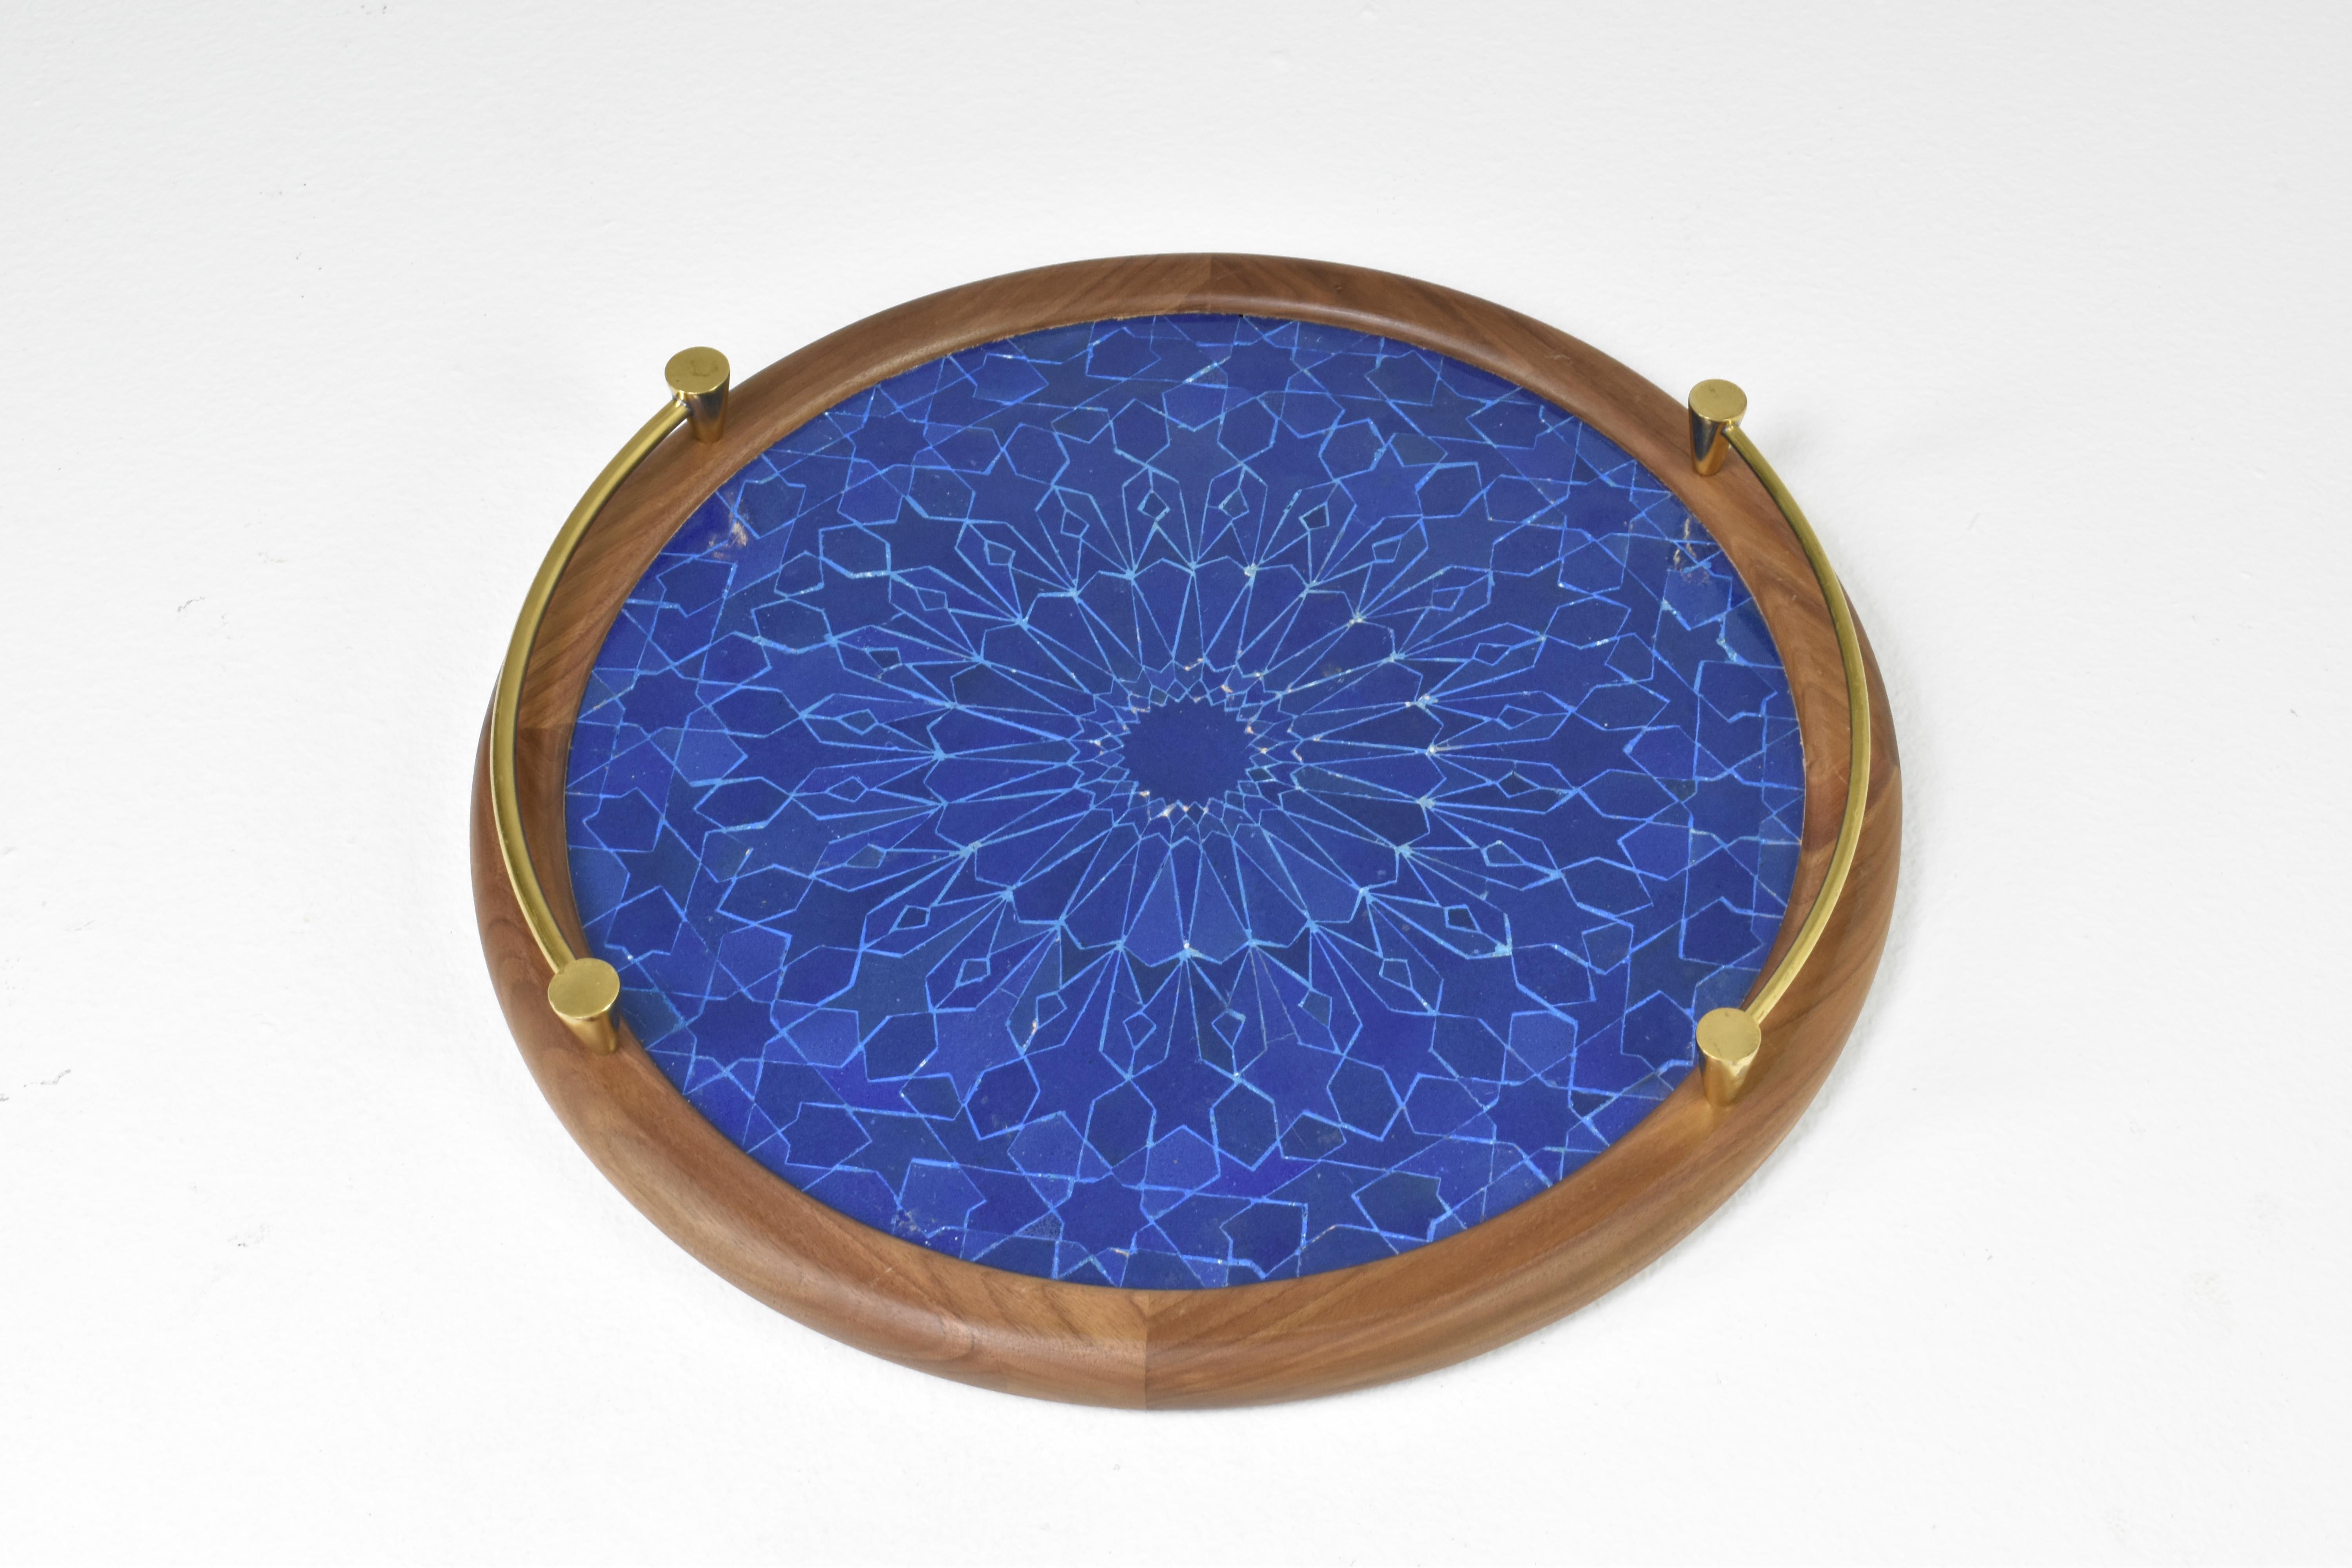 A contemporary handcrafted tray composed of a handmade zellige mosaic blue surface, a walnut frame and polished elegant brass handles. 
Designed by Jonathan Amar at his atelier in Rabat 

This piece is meticulously handcrafted, imbuing it with a